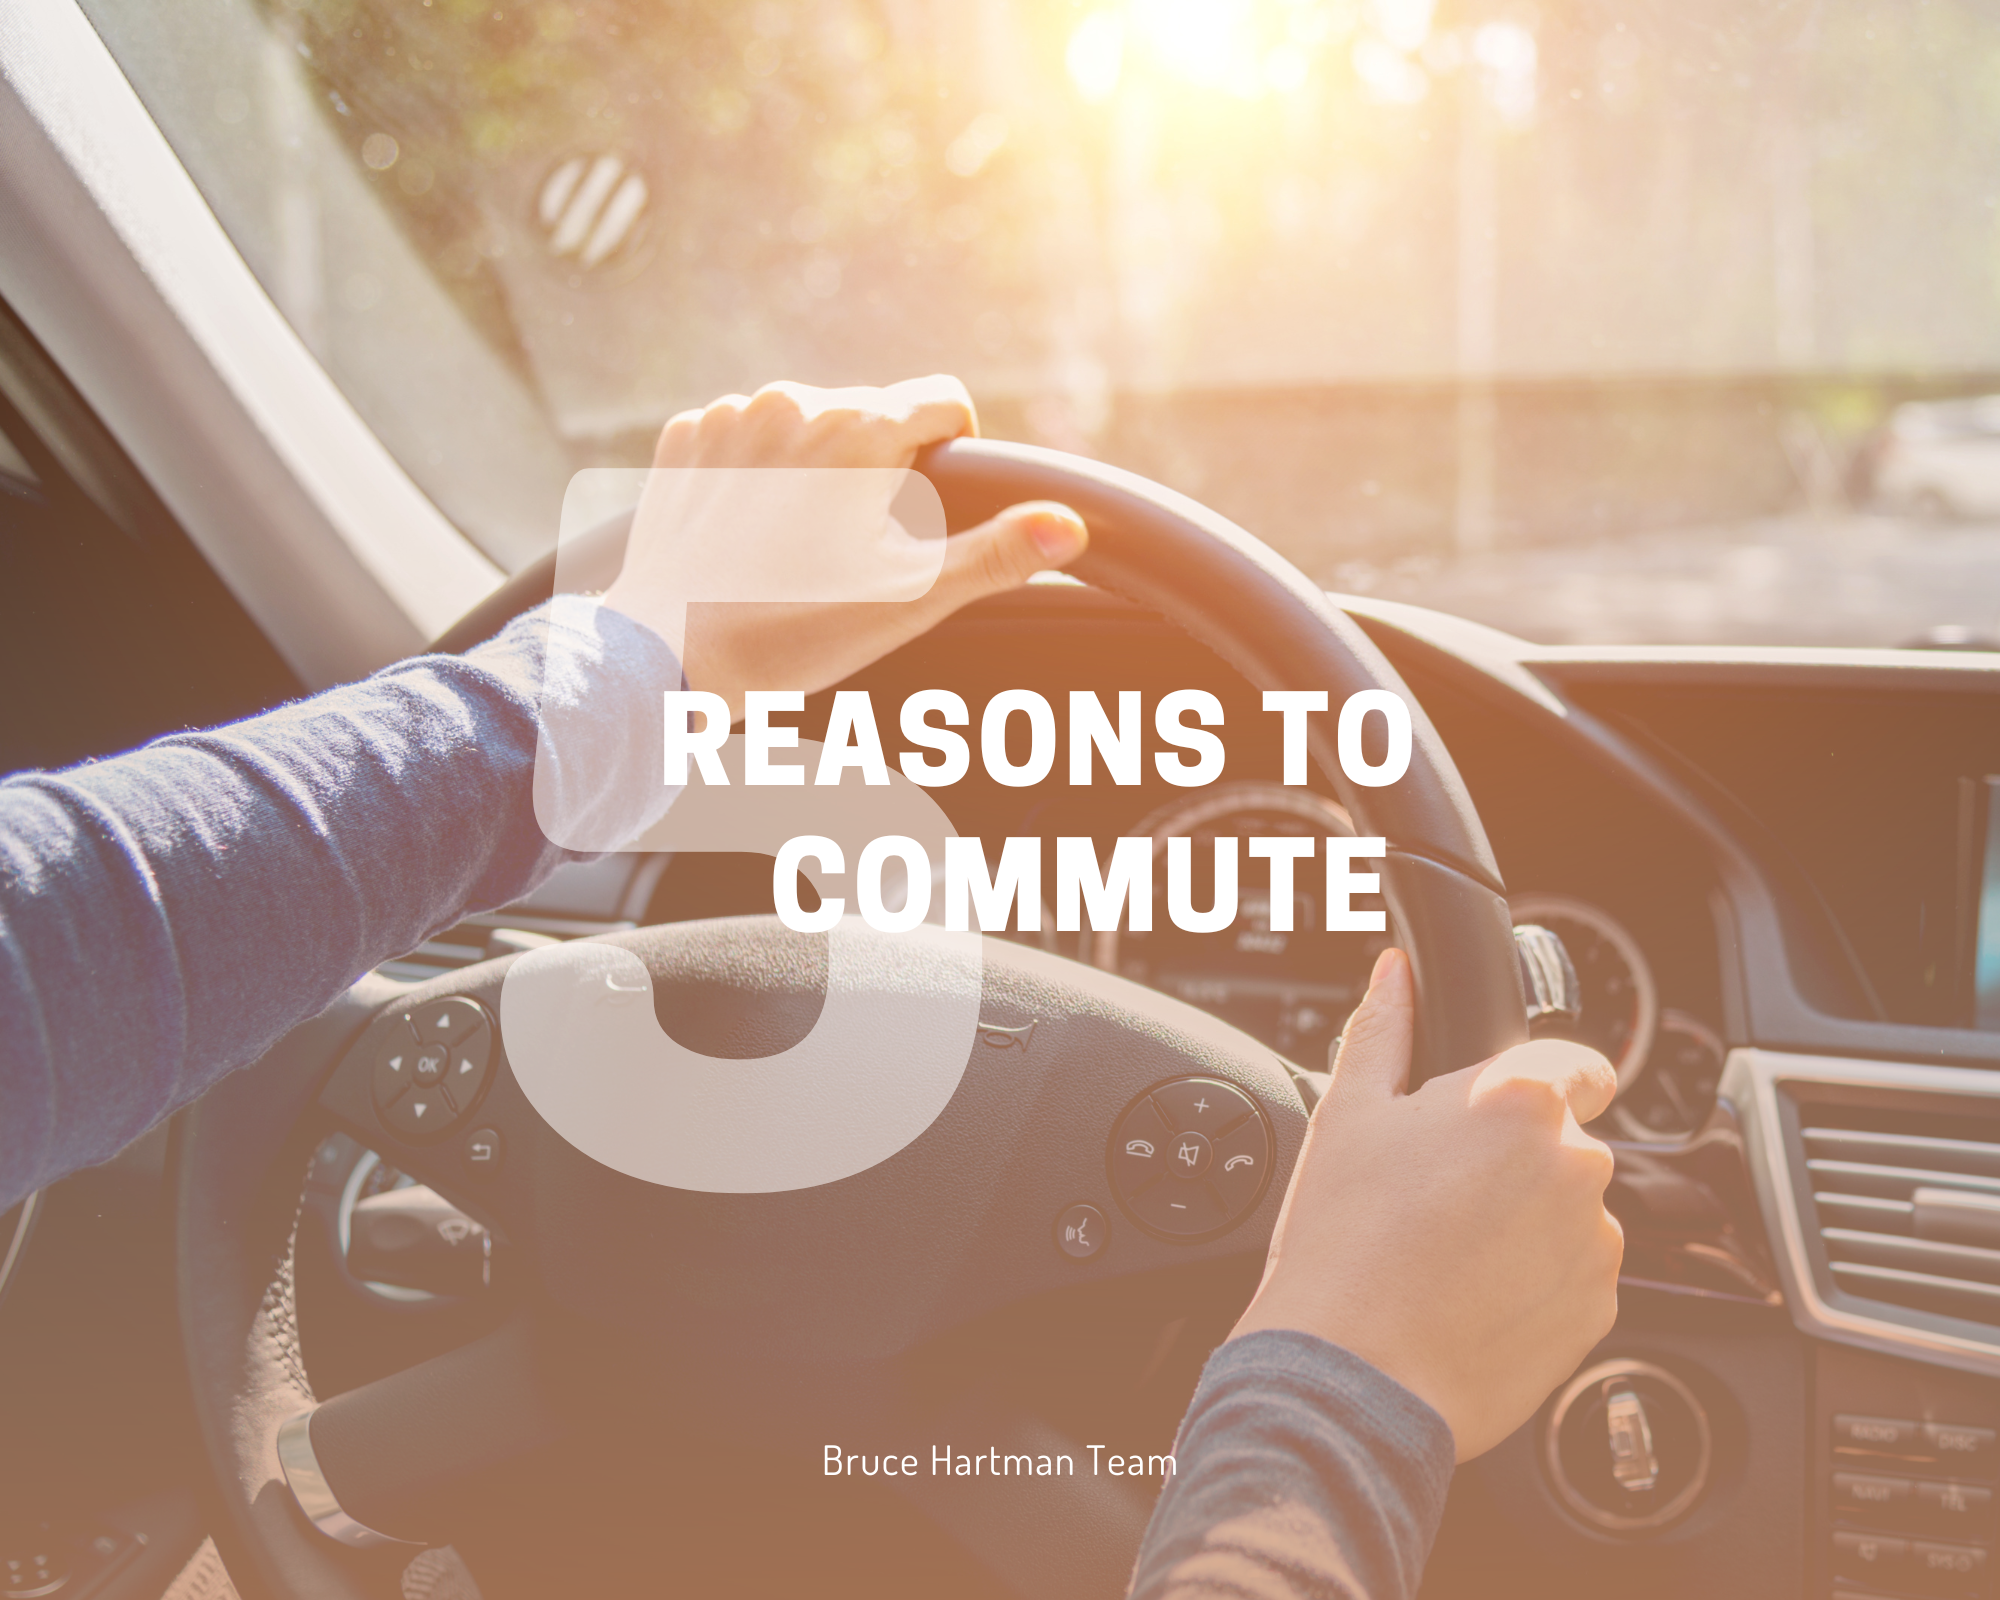 5 reasons to commute